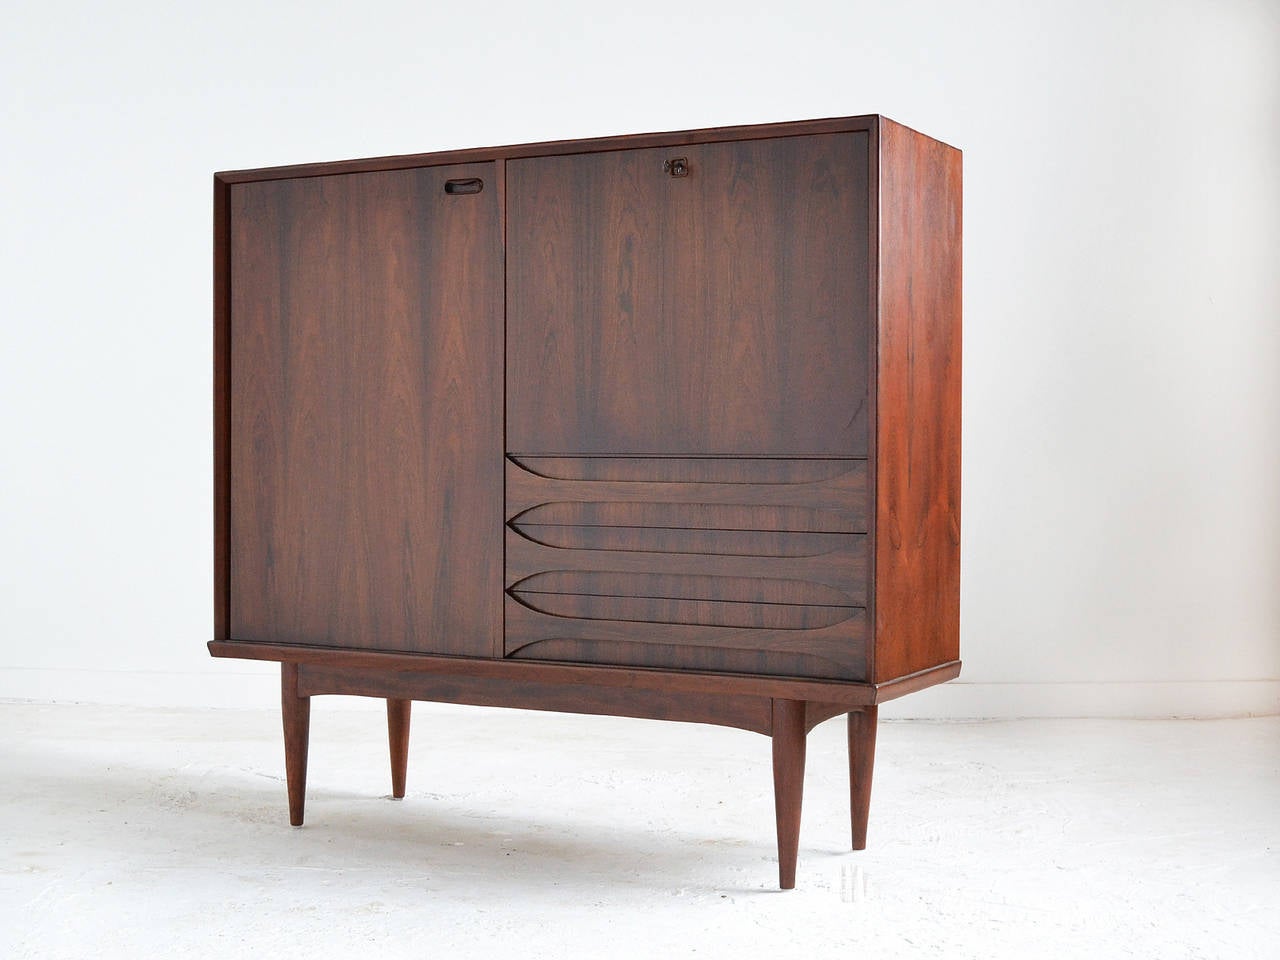 A stunning piece that garners attention in any room, this tall chest or bar by Arne Vodder is made of rich, highly figured rosewood. It has two doors (one of which locks) that conceal four oak shelves and a bank of three low drawers. The case is